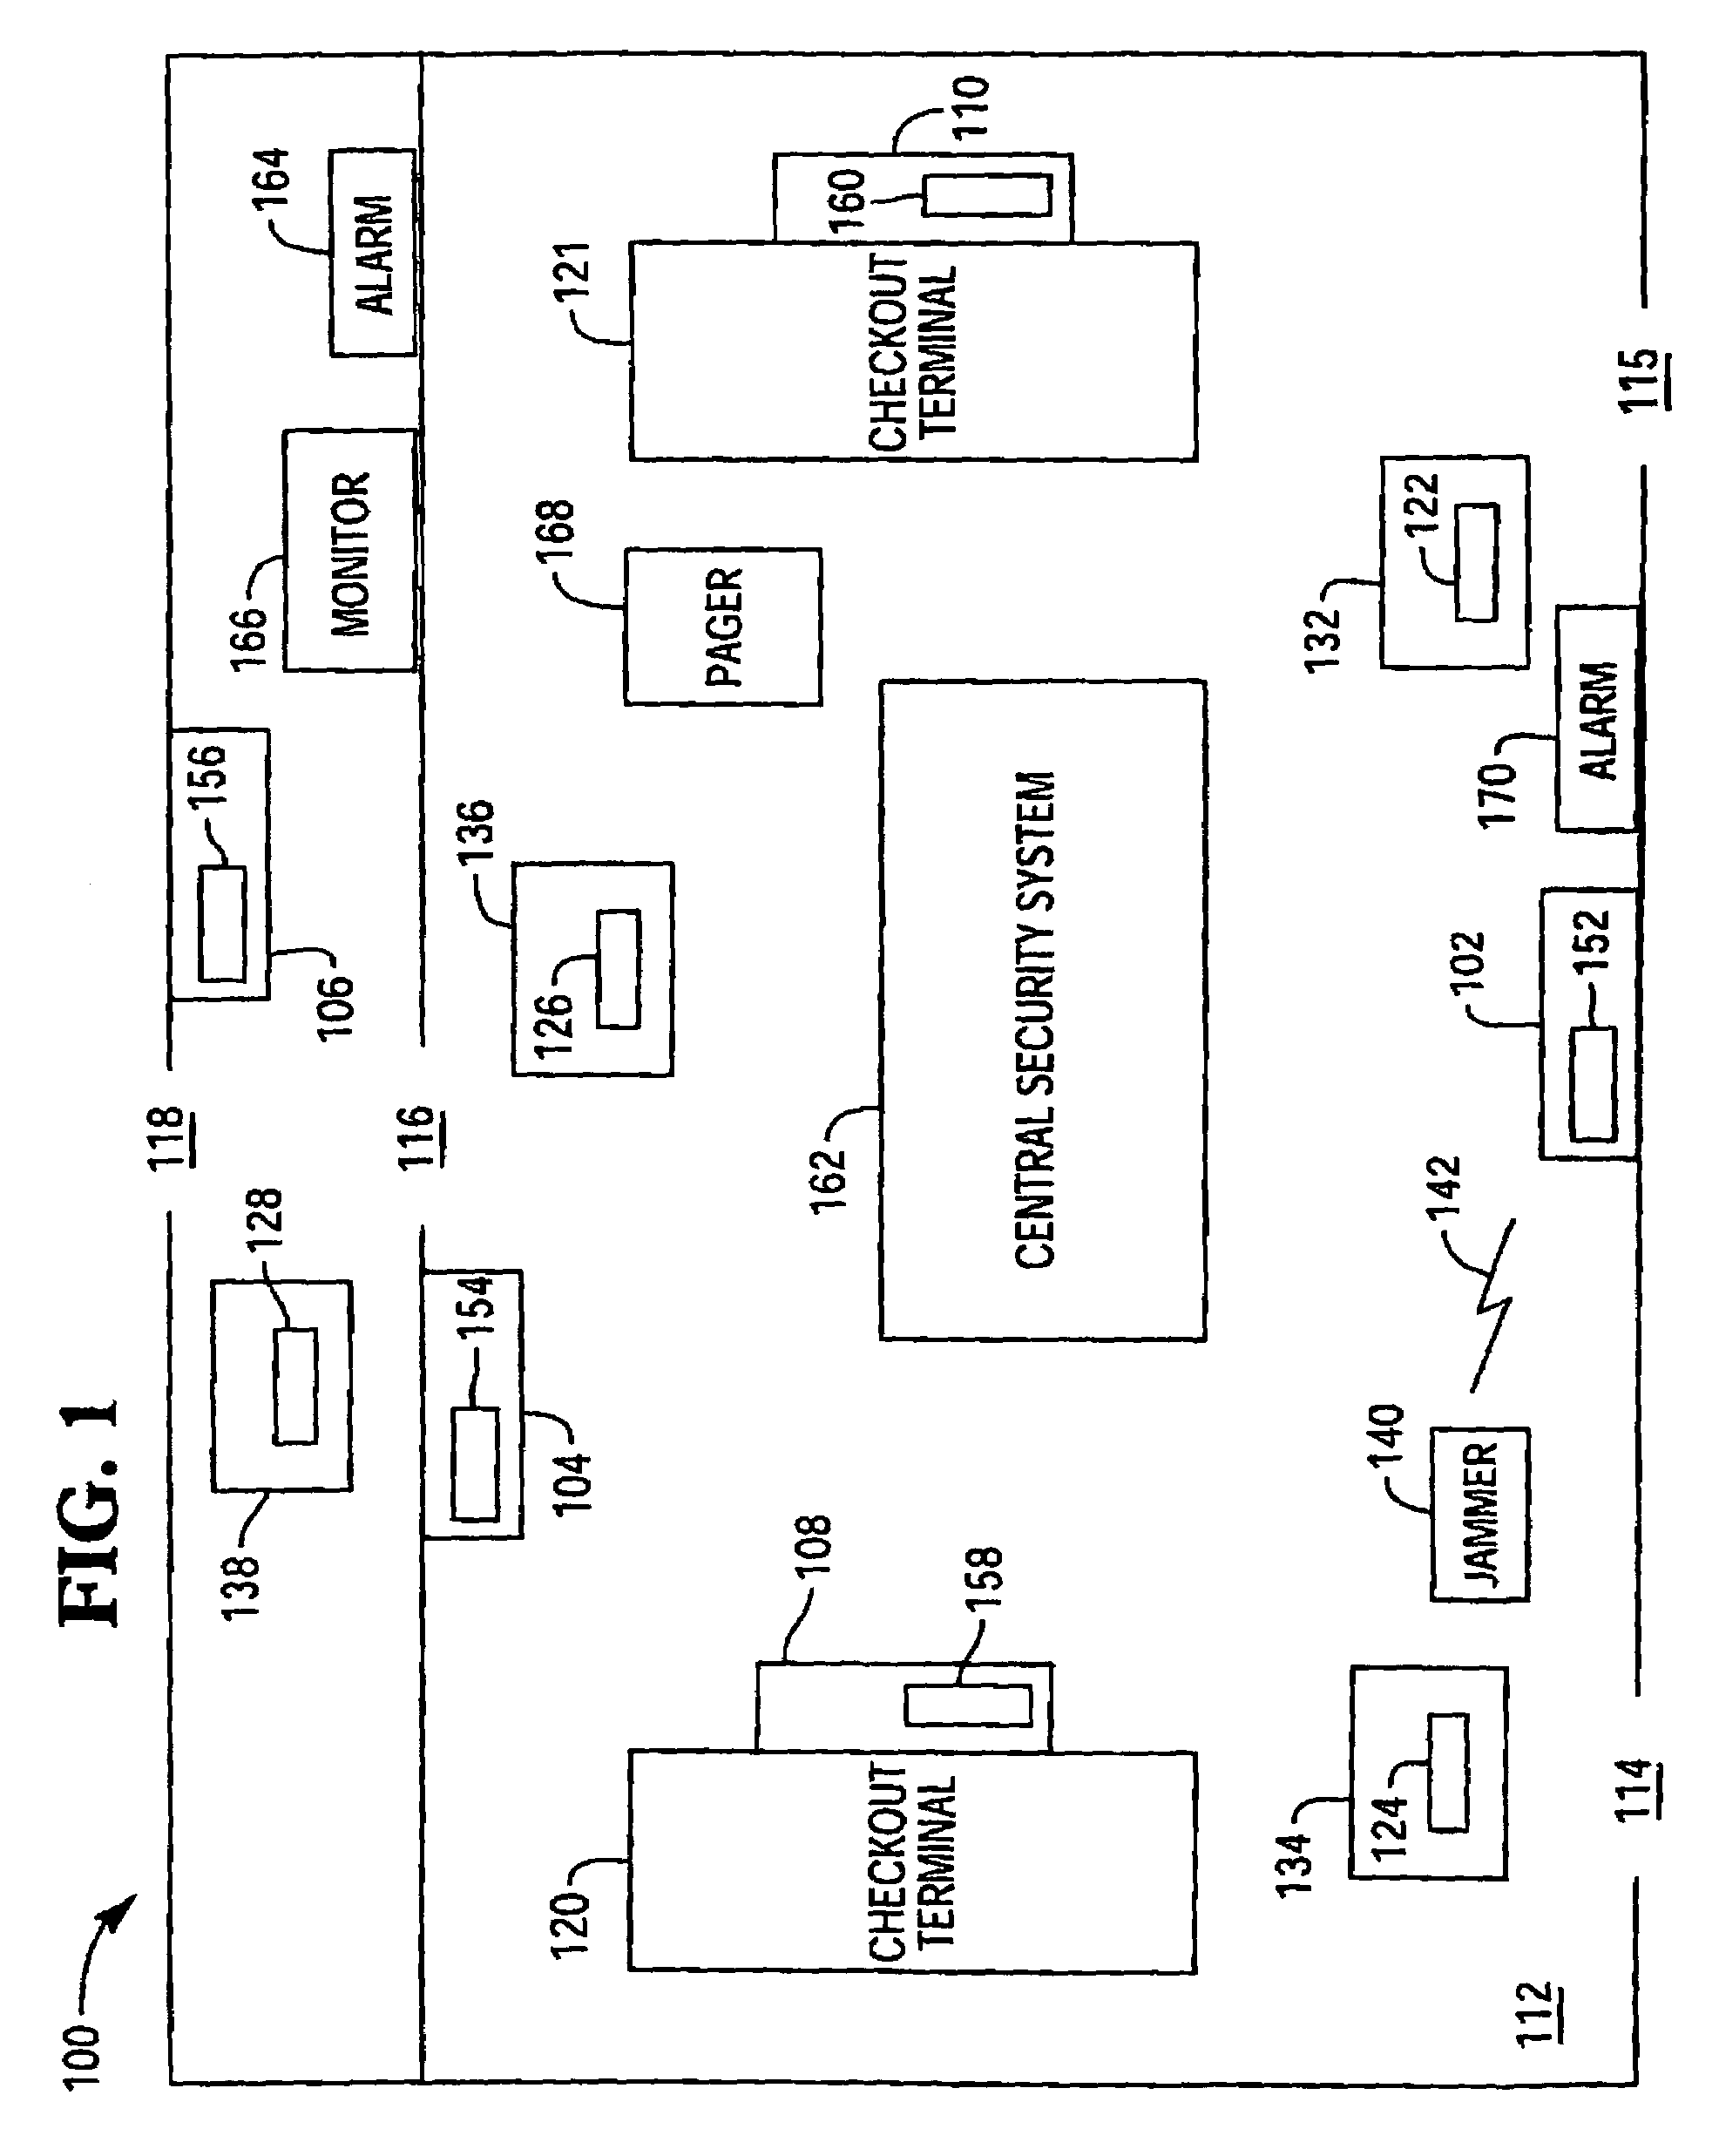 Anti-jamming detector for radio frequency identification systems